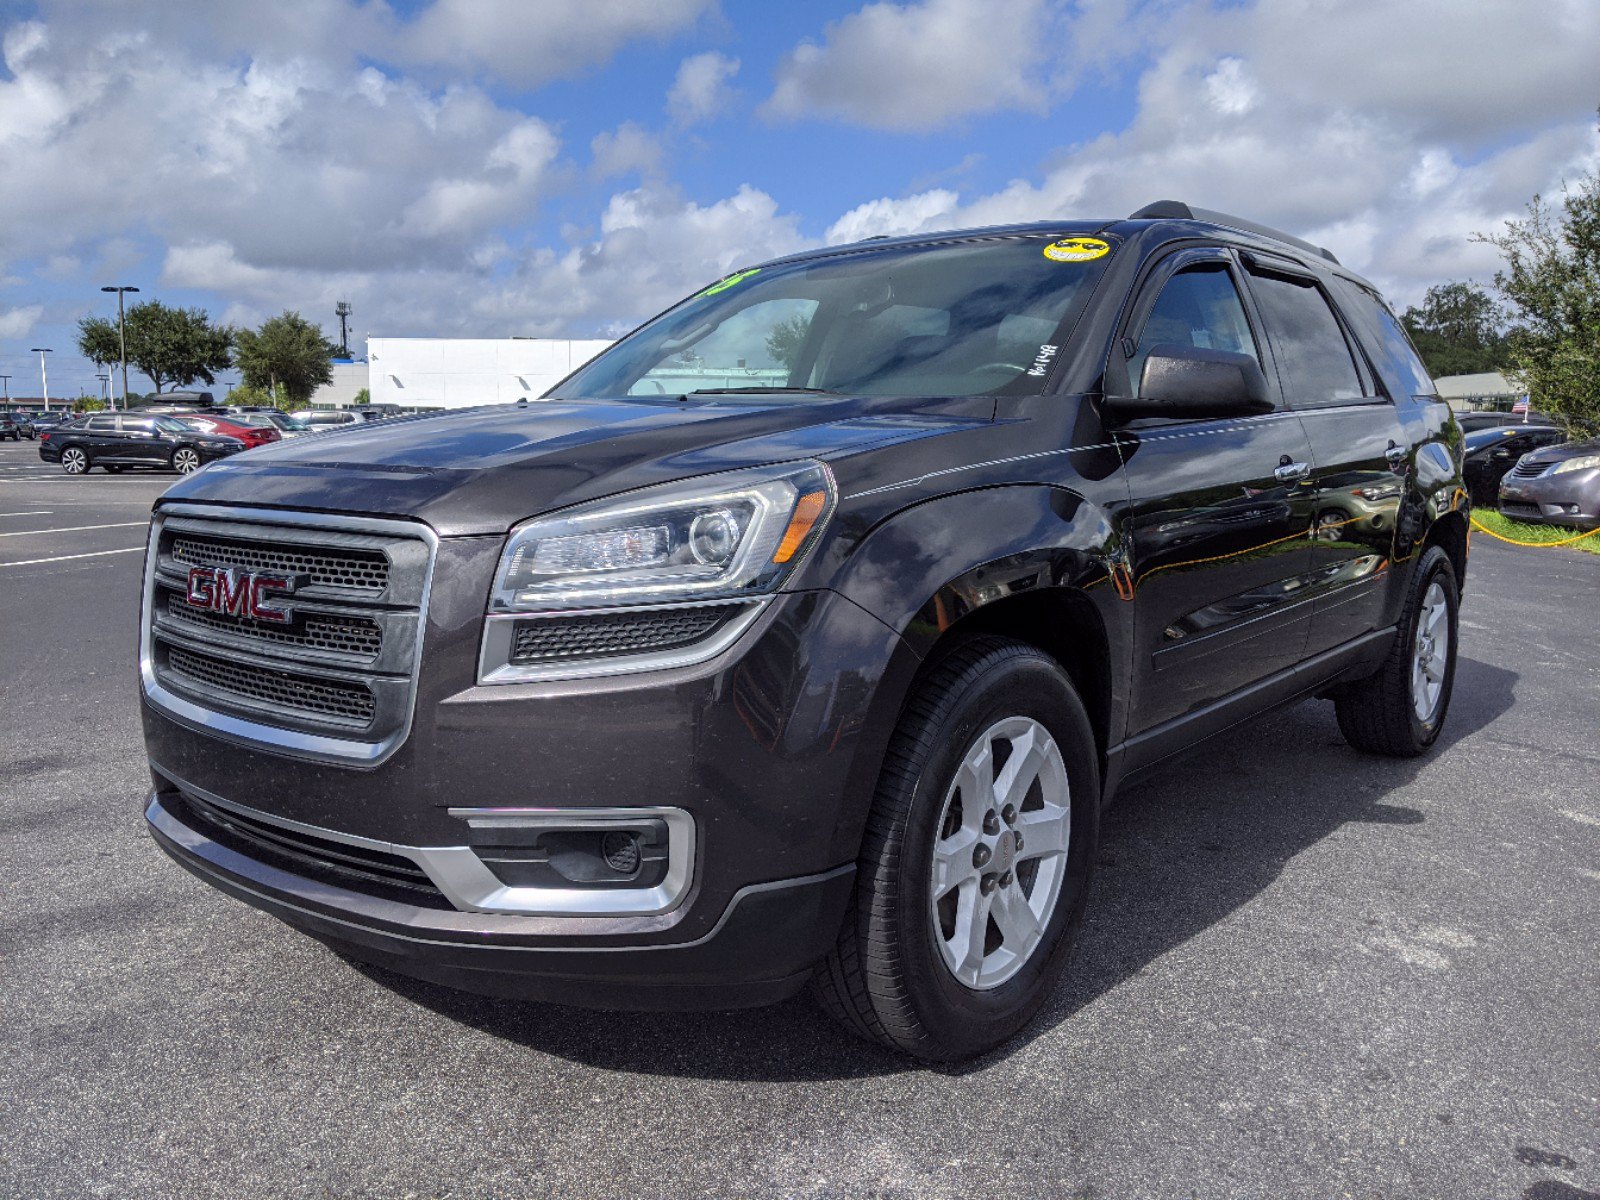 Pre Owned 2015 GMC Acadia SLE 1 4D Sport Utility for Sale 16114A 